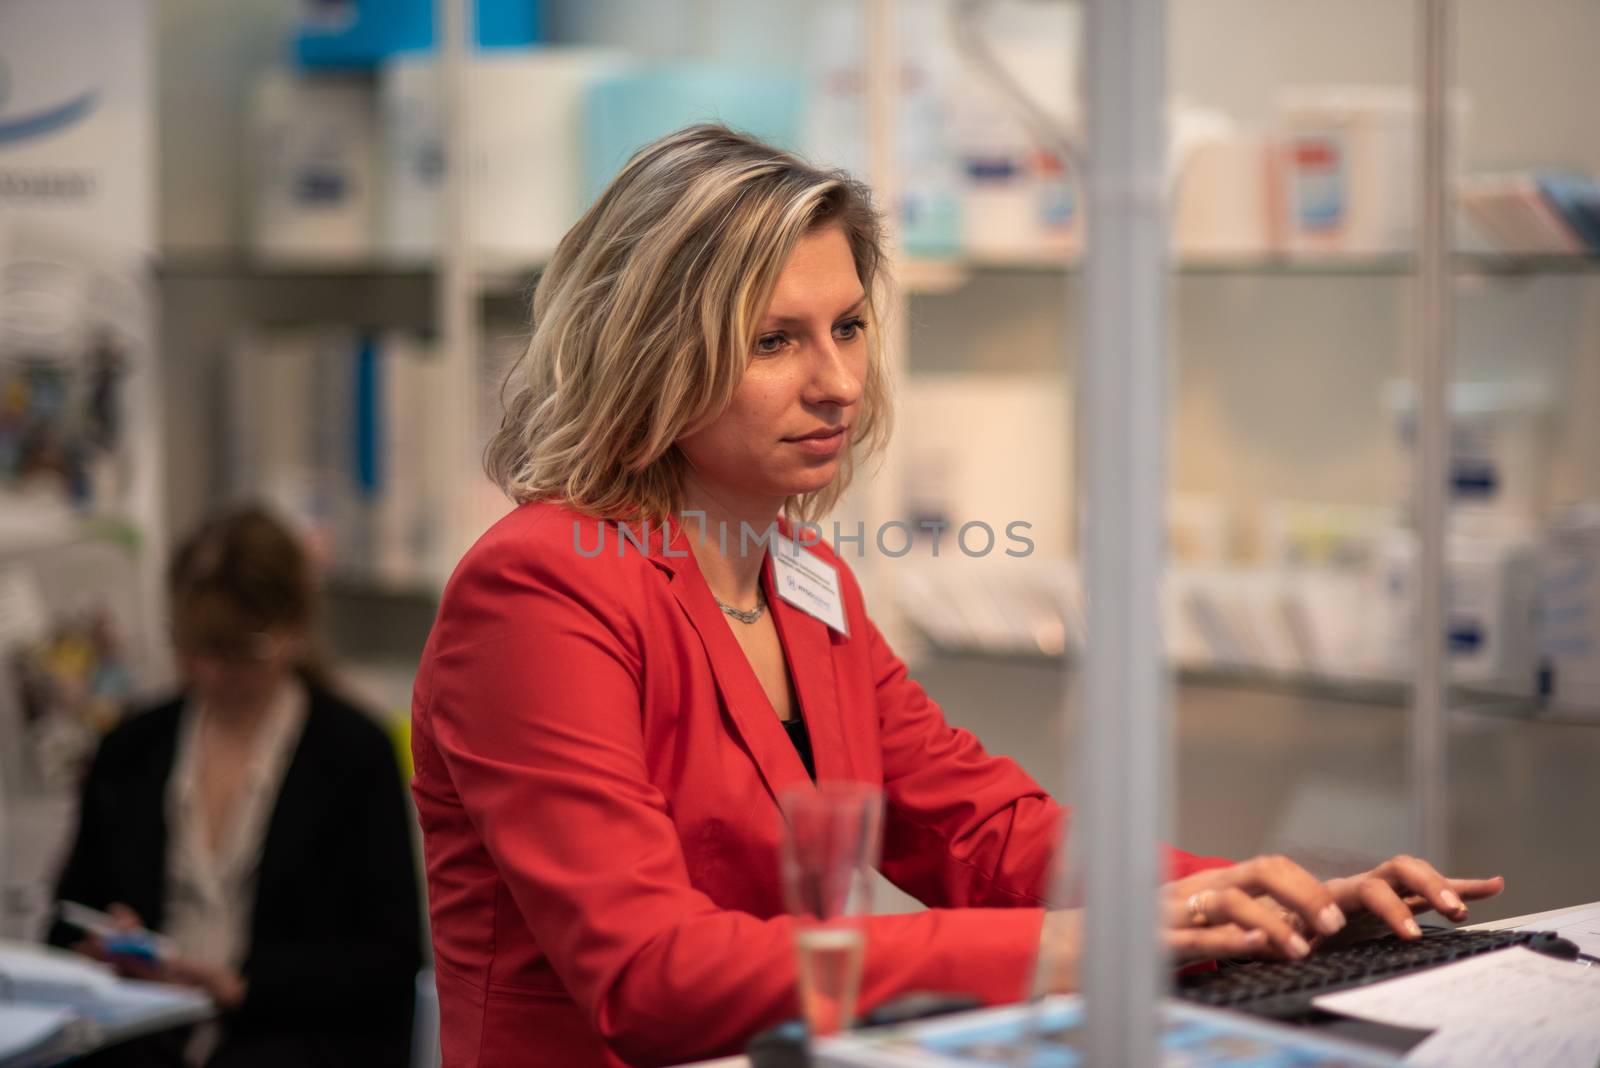 20/05/2018. Brno, Czech Republic. Woman working with her computer while attending an event at the convention trade center in Brno. BVV Brno Exhibition center. Czech Republic by gonzalobell